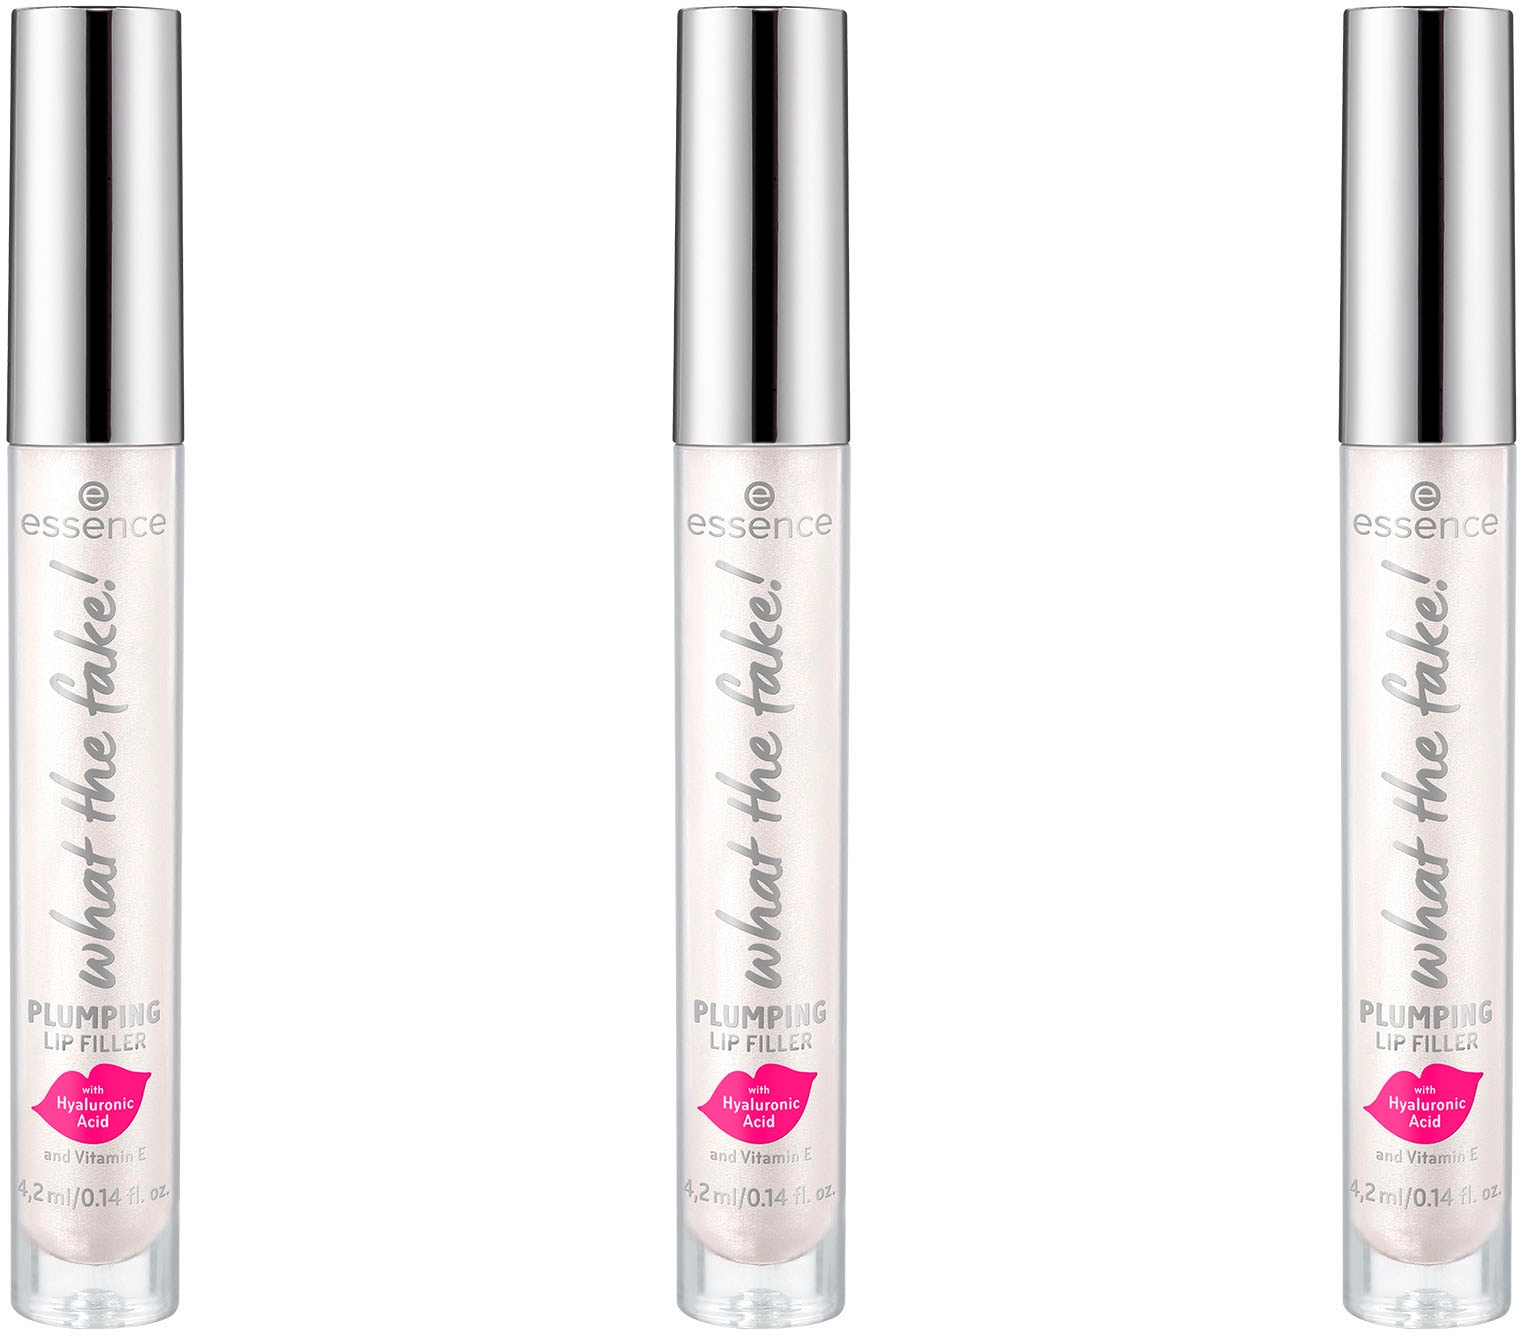 Essence Lipgloss »what the online LIP kaufen (Set, fake! FILLER«, tlg.) 3 PLUMPING